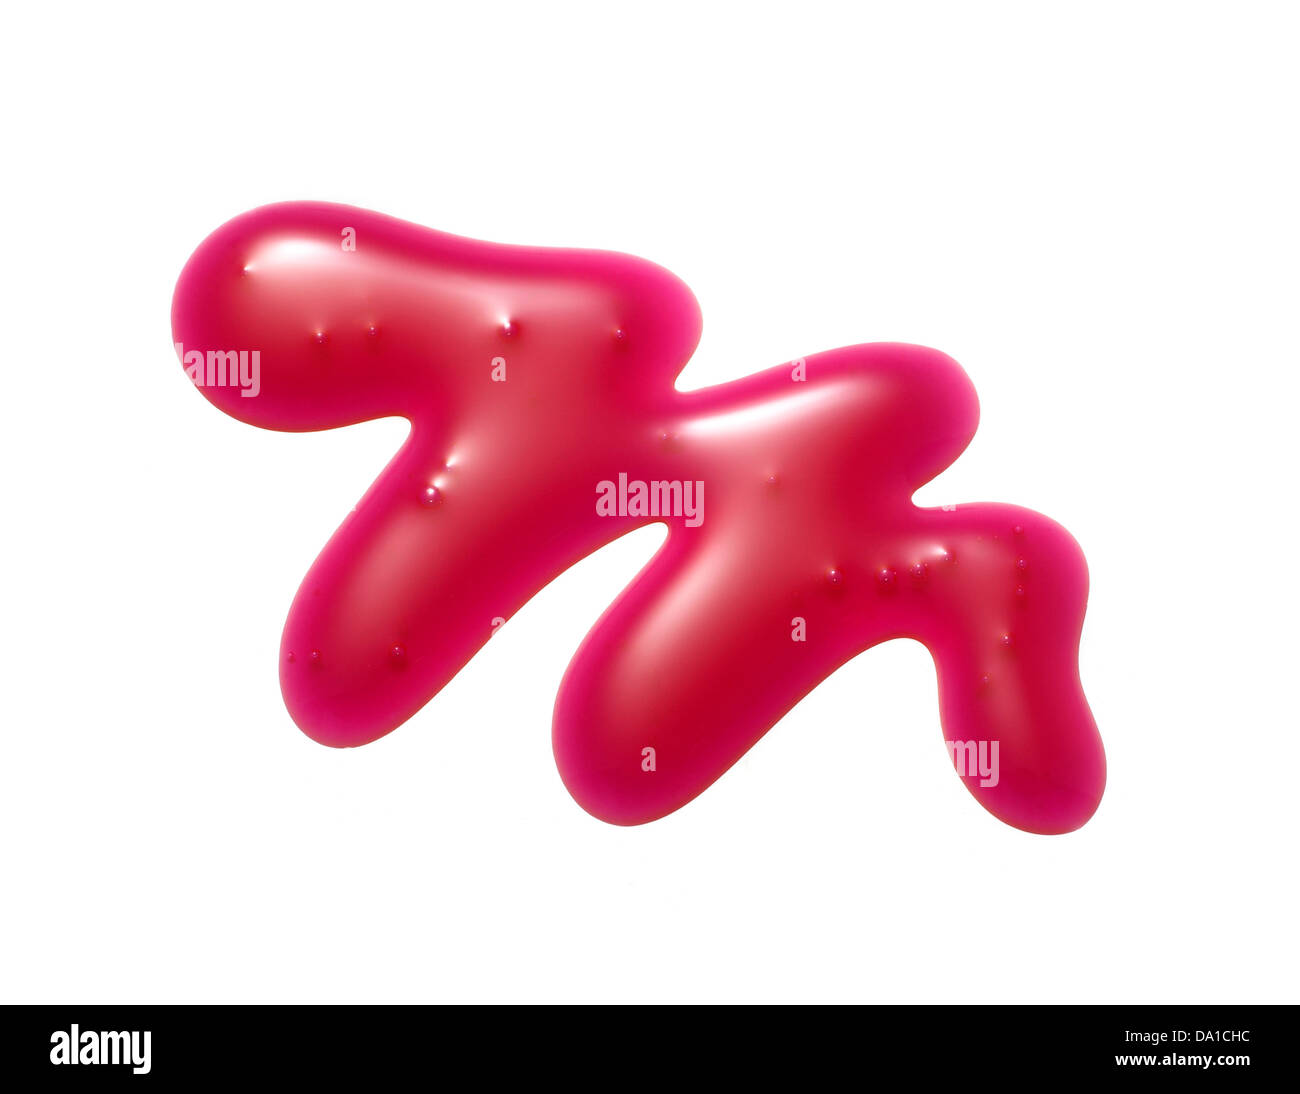 red lip gloss squiggle cut out onto a white background Stock Photo